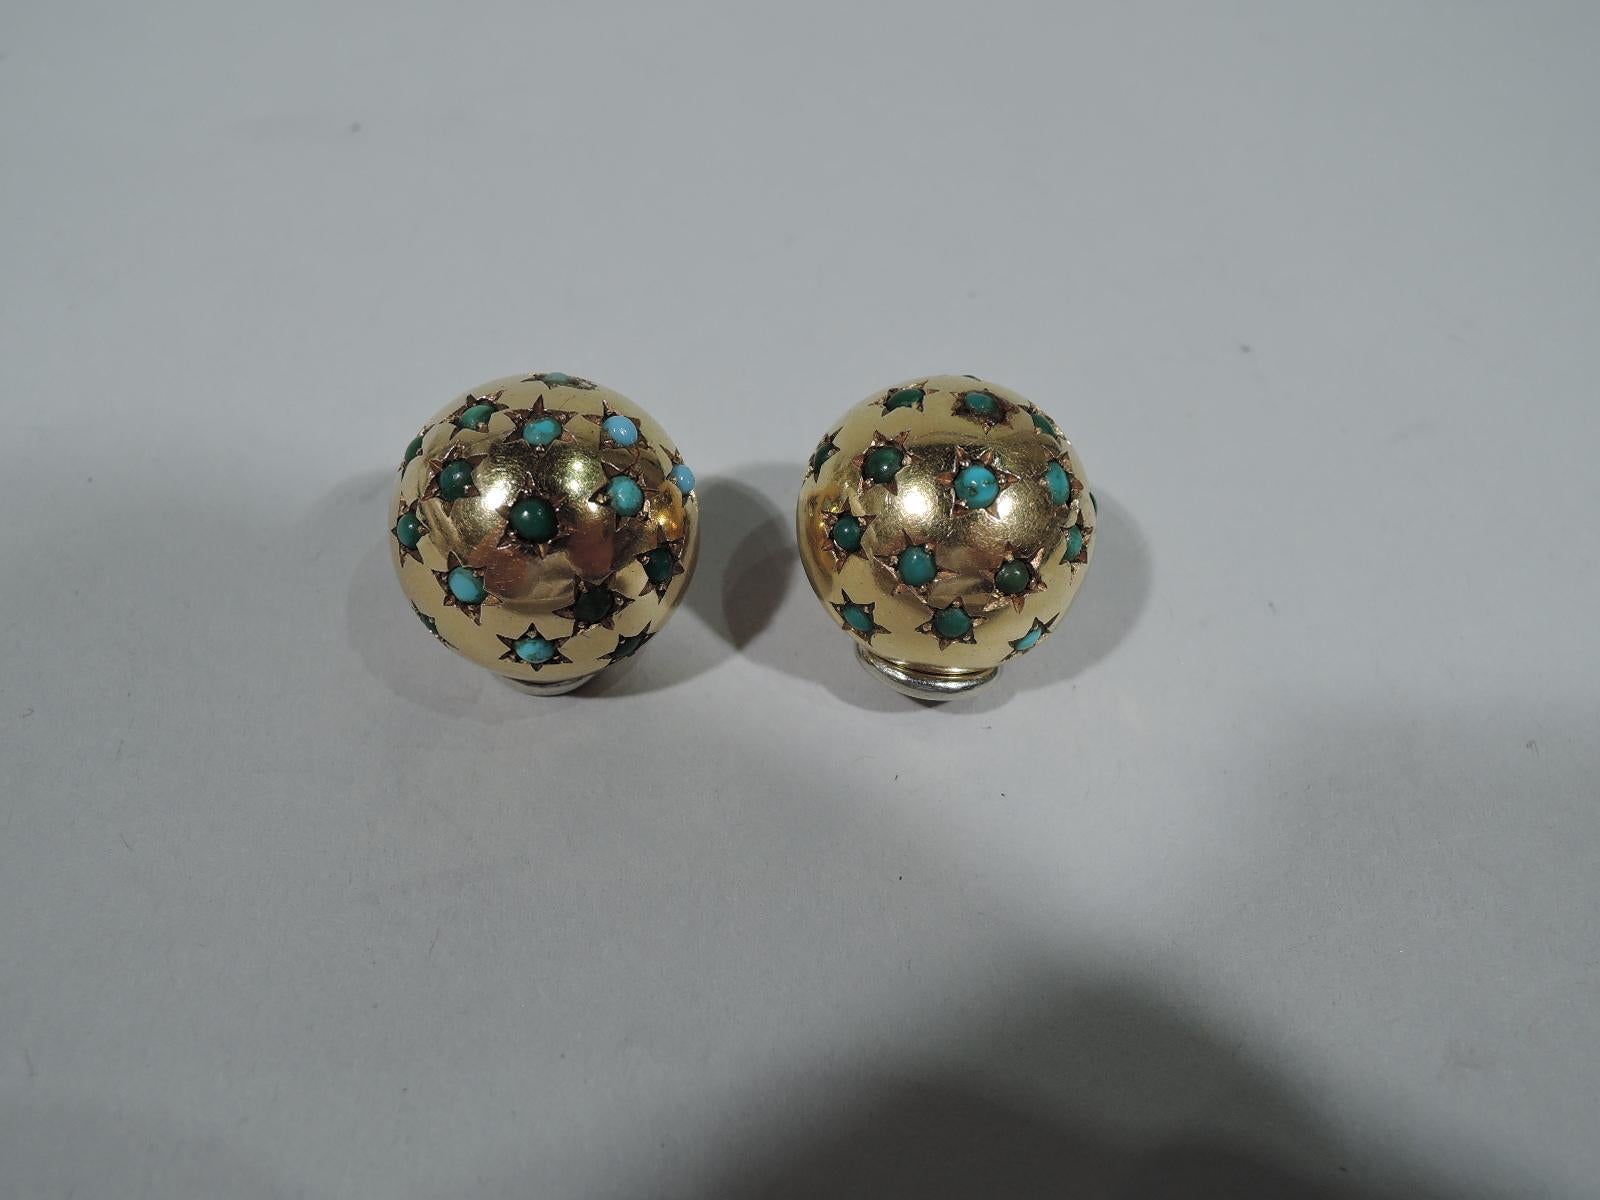 Pair of 18k gold and turquoise clip-on earrings. Each: Ball with incised stars inset with cabochon-cut turquoise beads. Smart and festive. United States, ca 1930. Stamped “750”. 